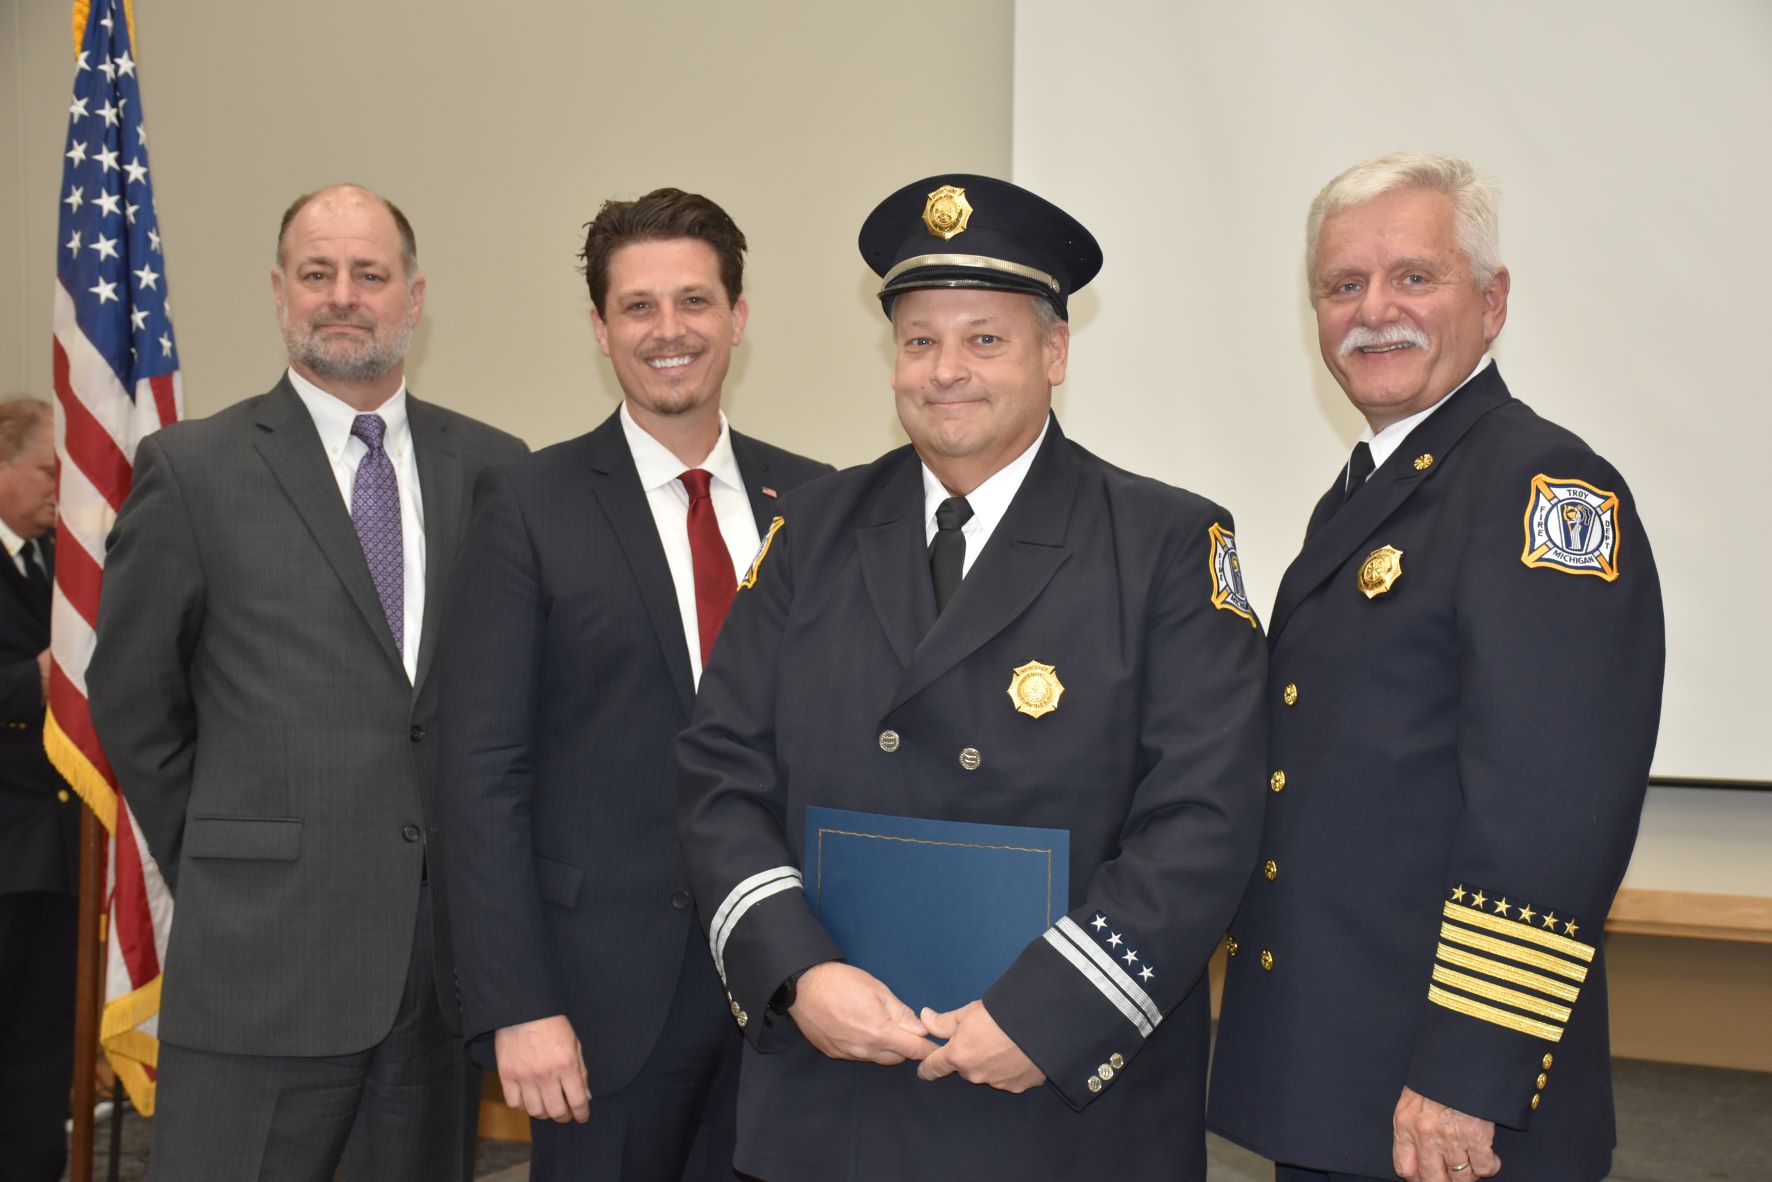 Station 1 Fire Fighter of the Year Award - Troy Auto Care